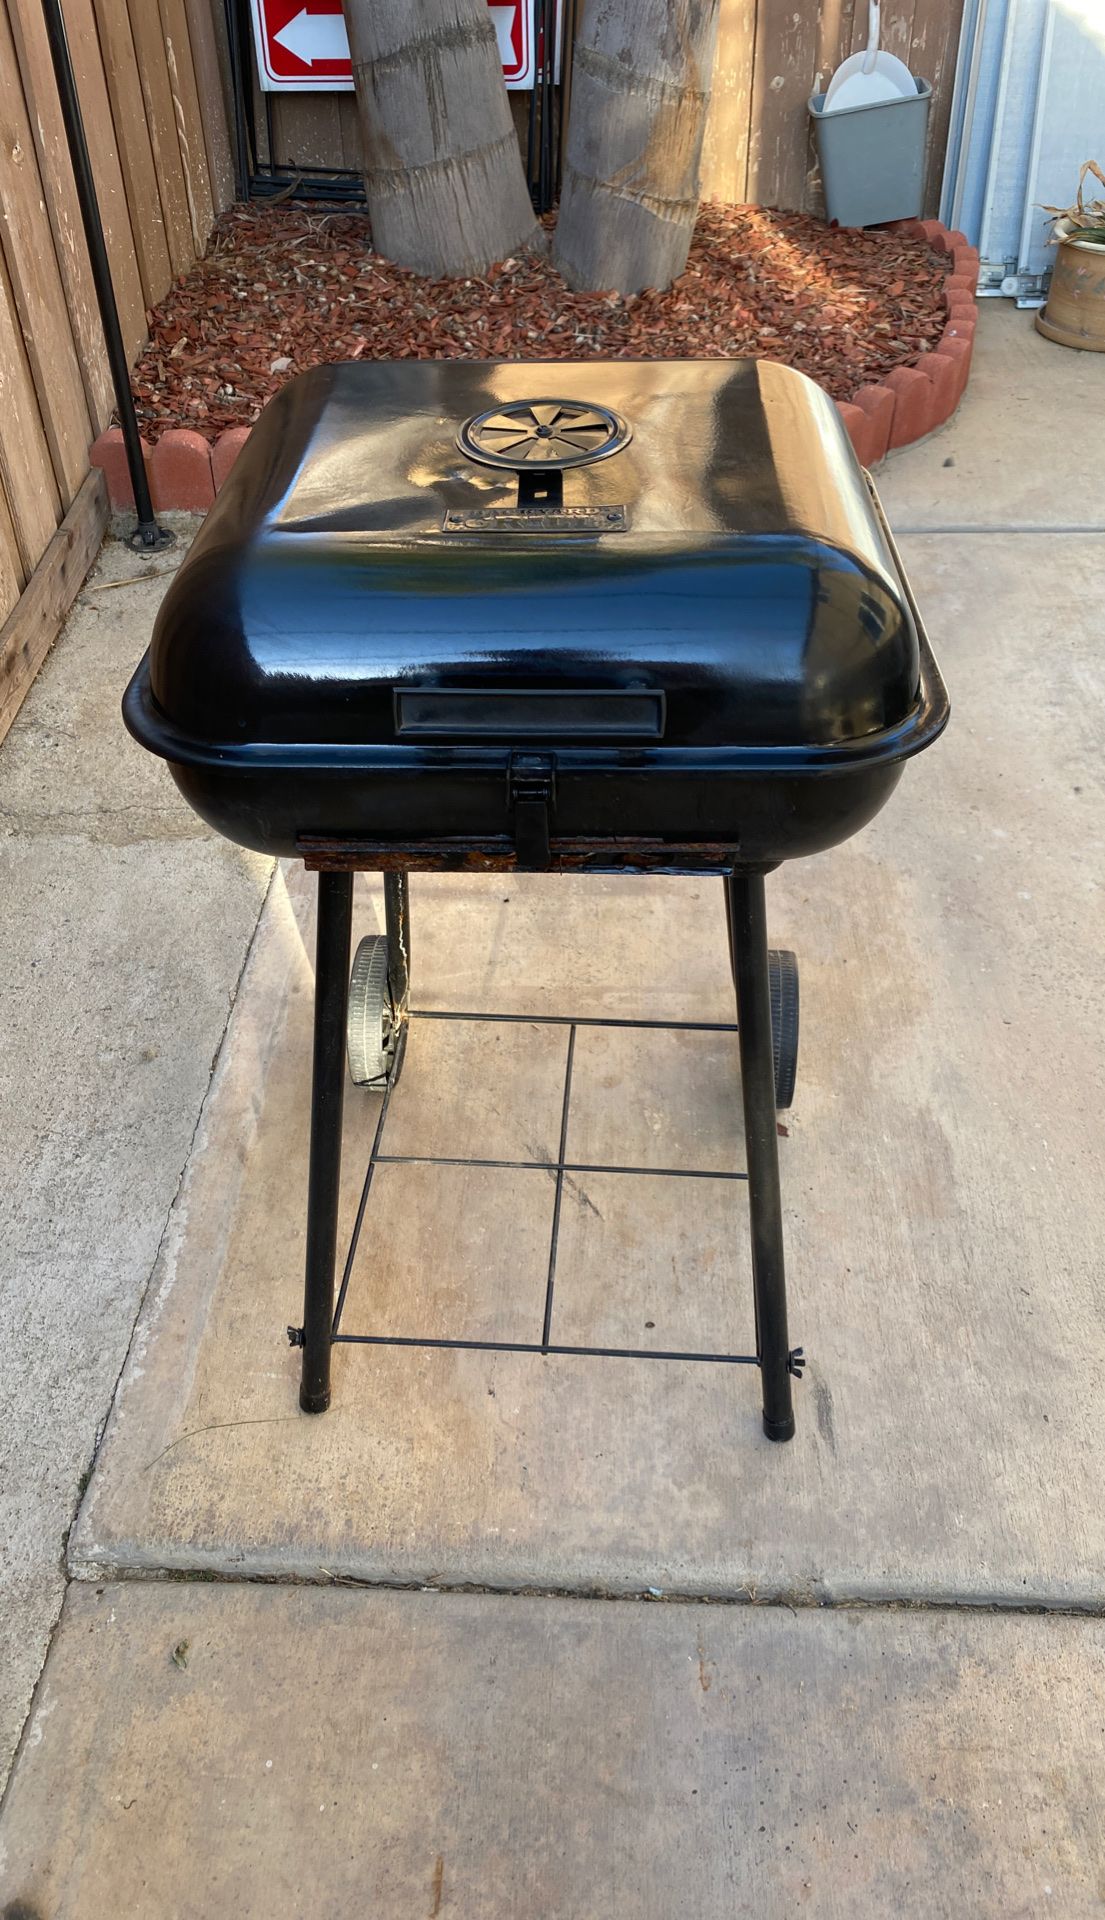 Charcoal bbq good condition come with 4 piece cookware $ 20.